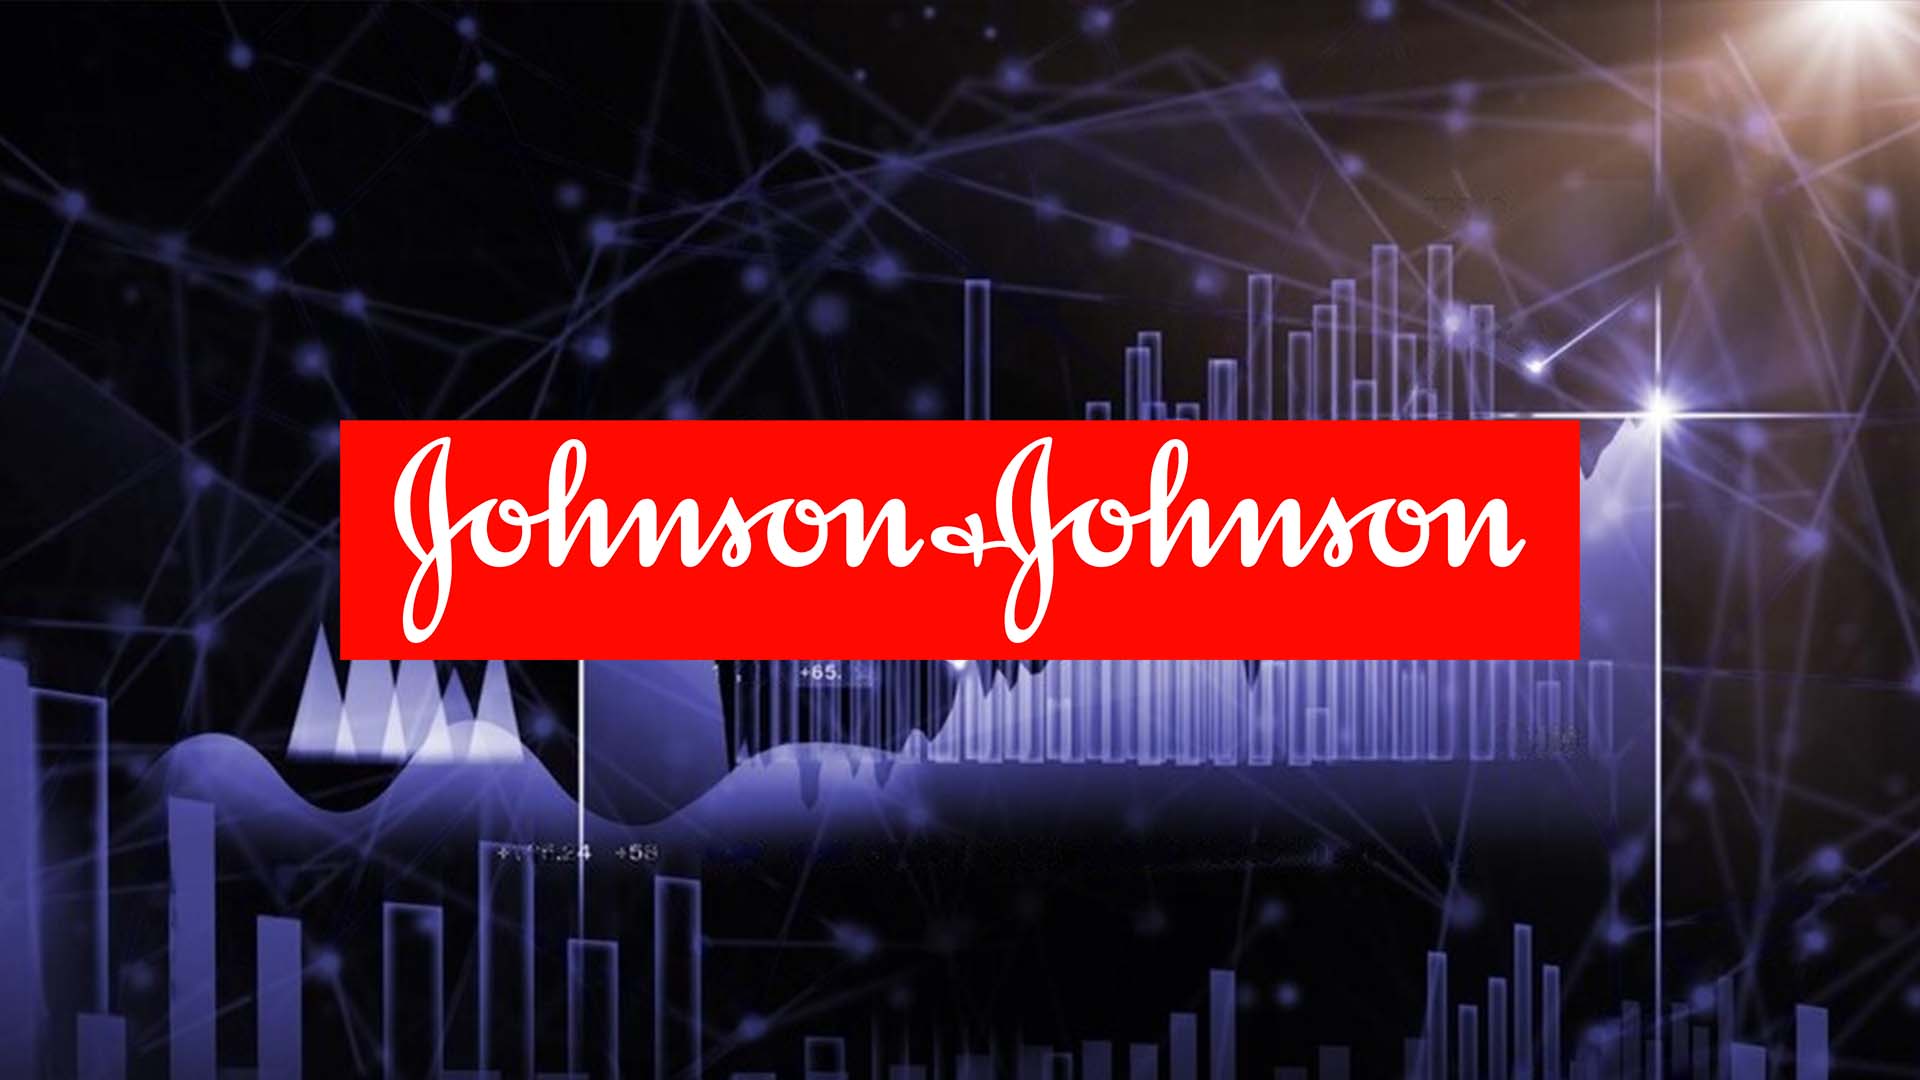 Johnson & Johnson Stock Price is Going to Pop-up Higher, Preference- Product or Stock?